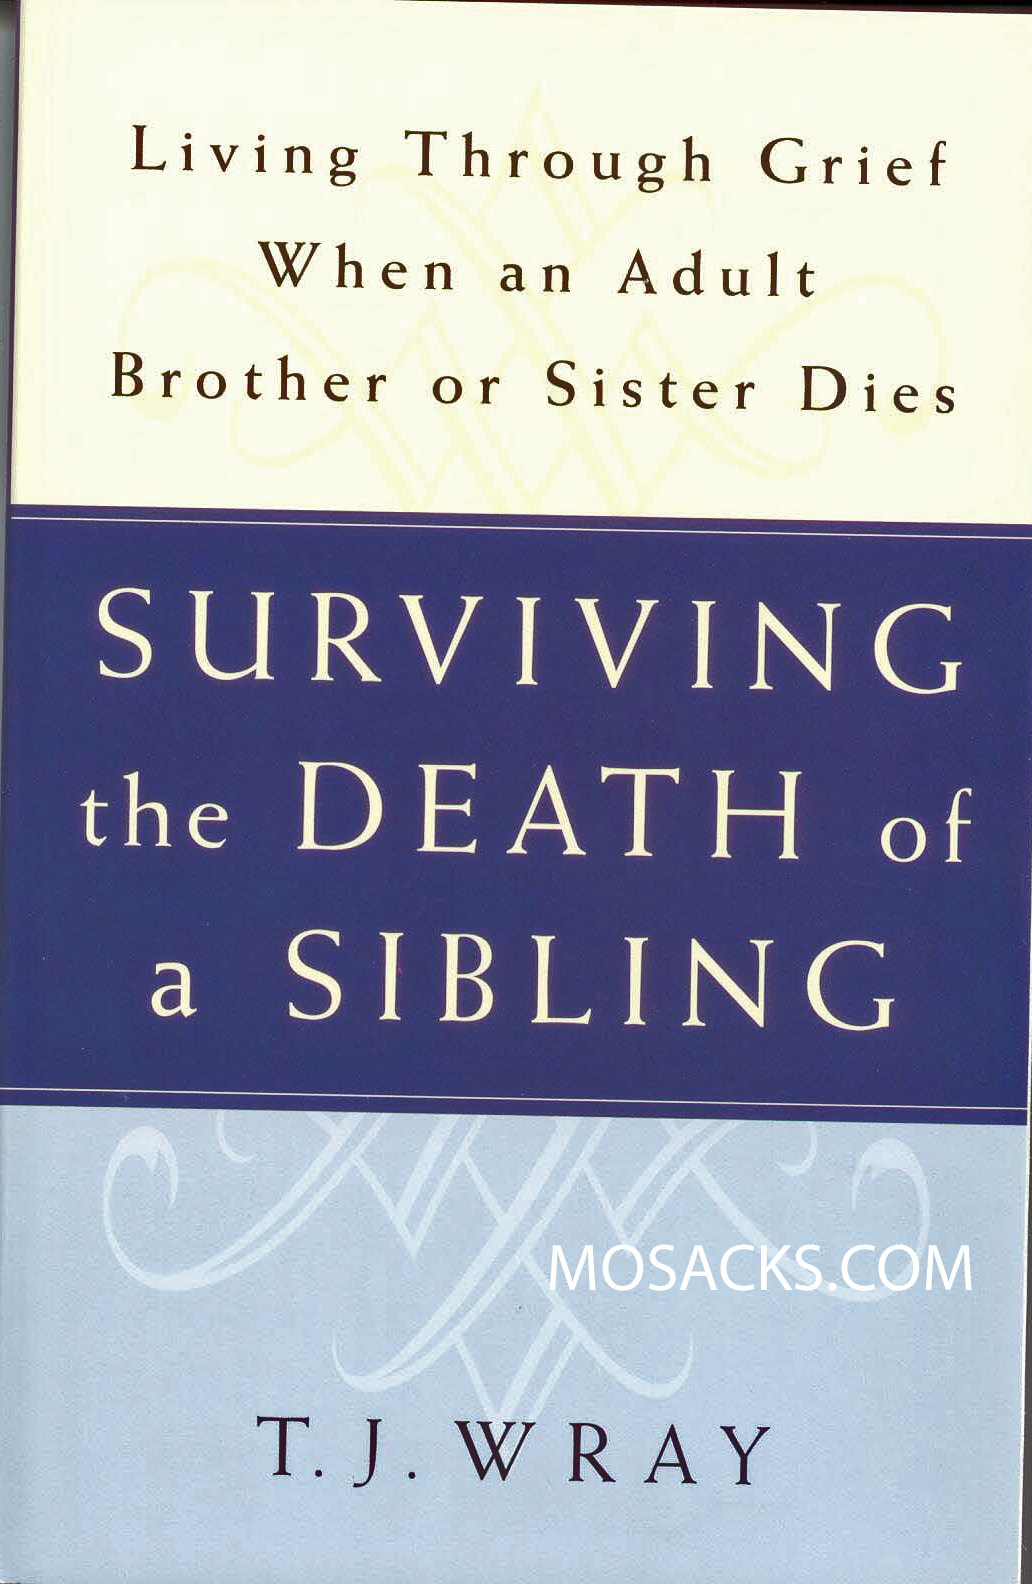 Surviving the Death of a Sibling by T. J. Wray